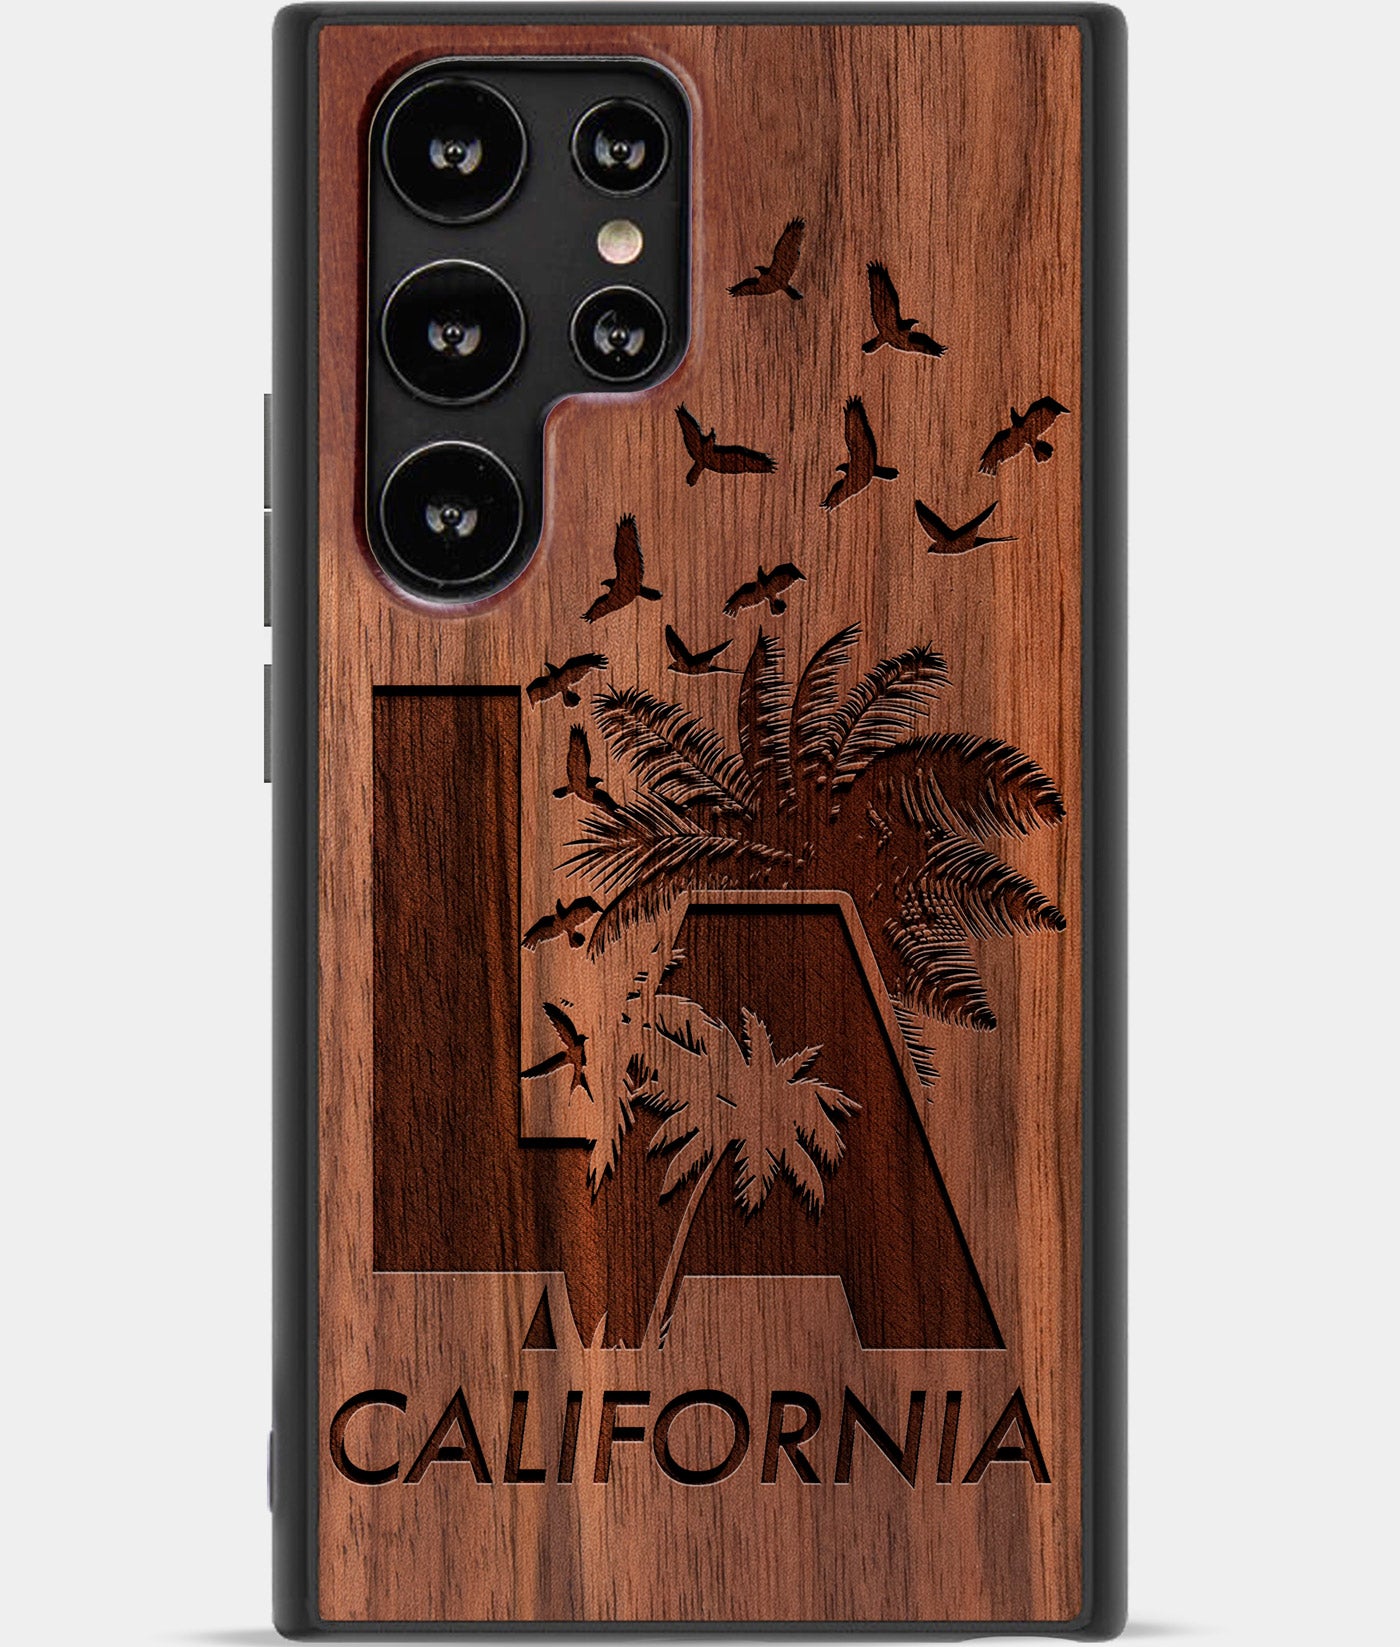 Los Angeles California iPhone S23 Ultra Case Venice Beach Souvenir Gifts Wood Samsung S23 Cover For Los Angeles Locals And Travelers Santa Monica Gifts California Souvenirs Note 20 Ultra Case